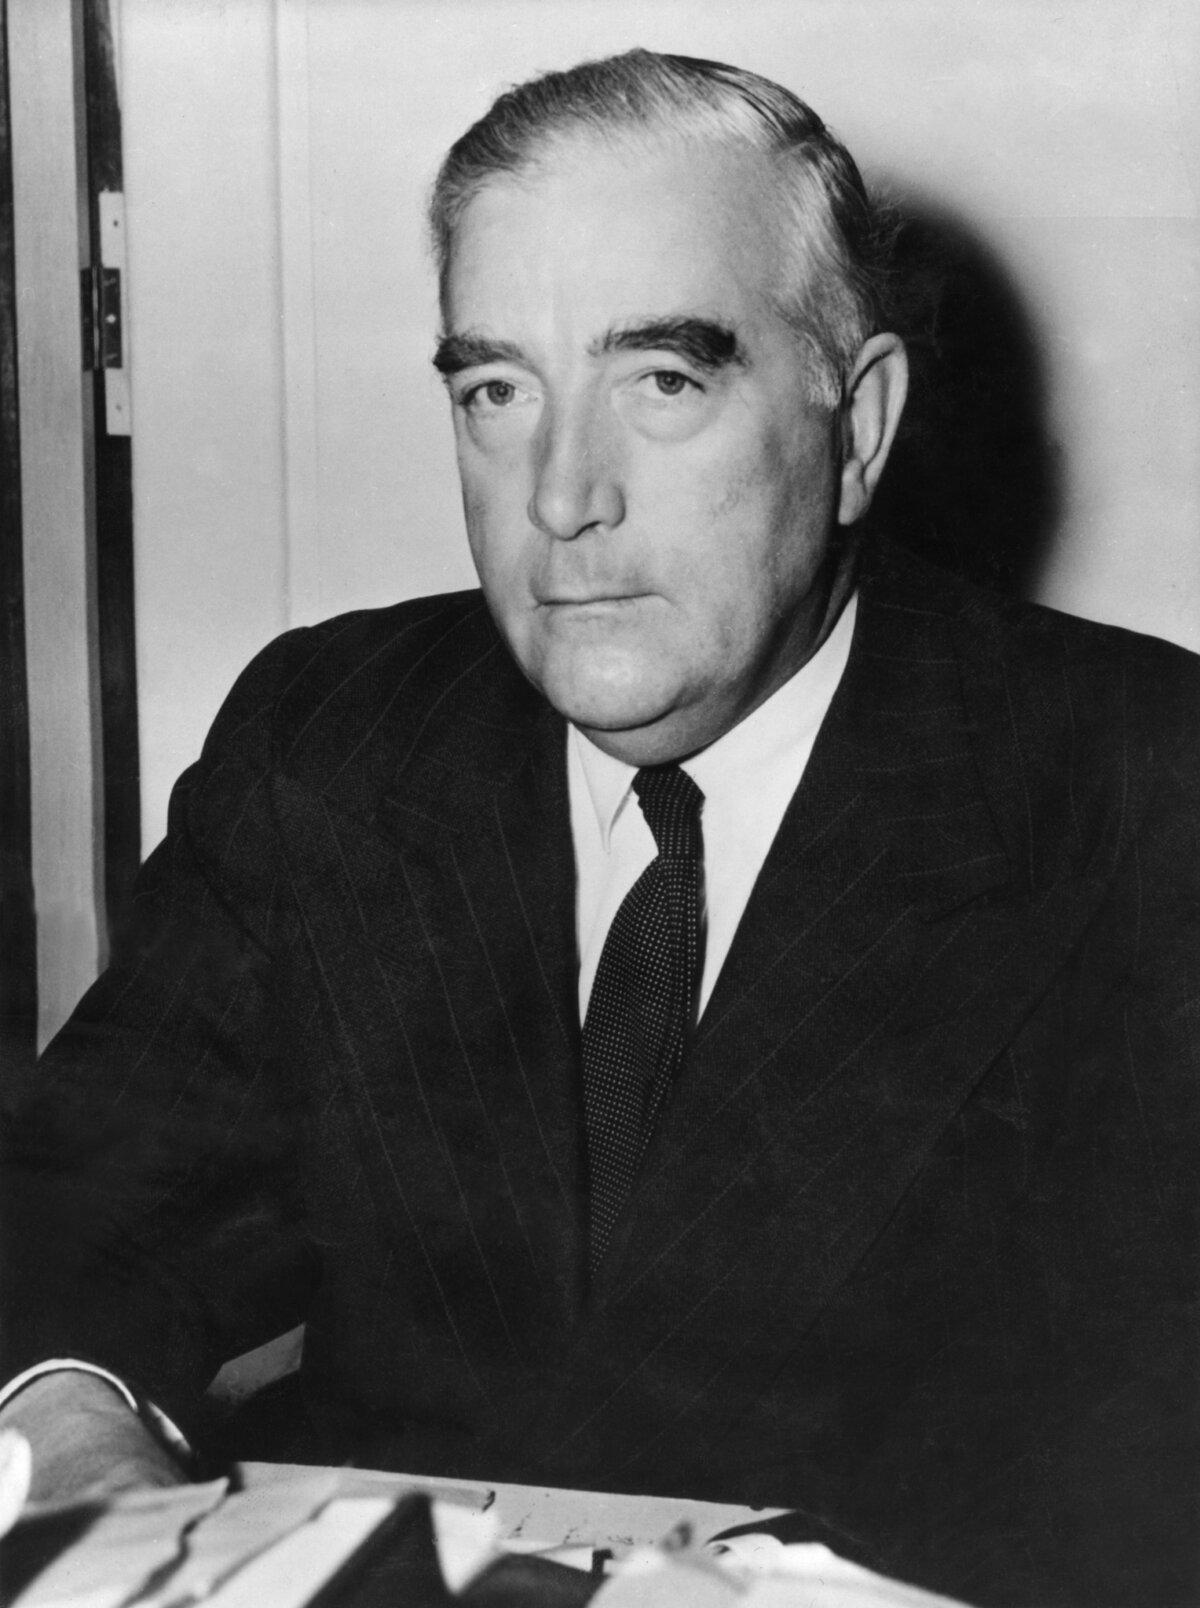 This undated picture shows Australian Prime Minister Sir Robert Gordon Menzies. (STR/AFP via Getty Images)